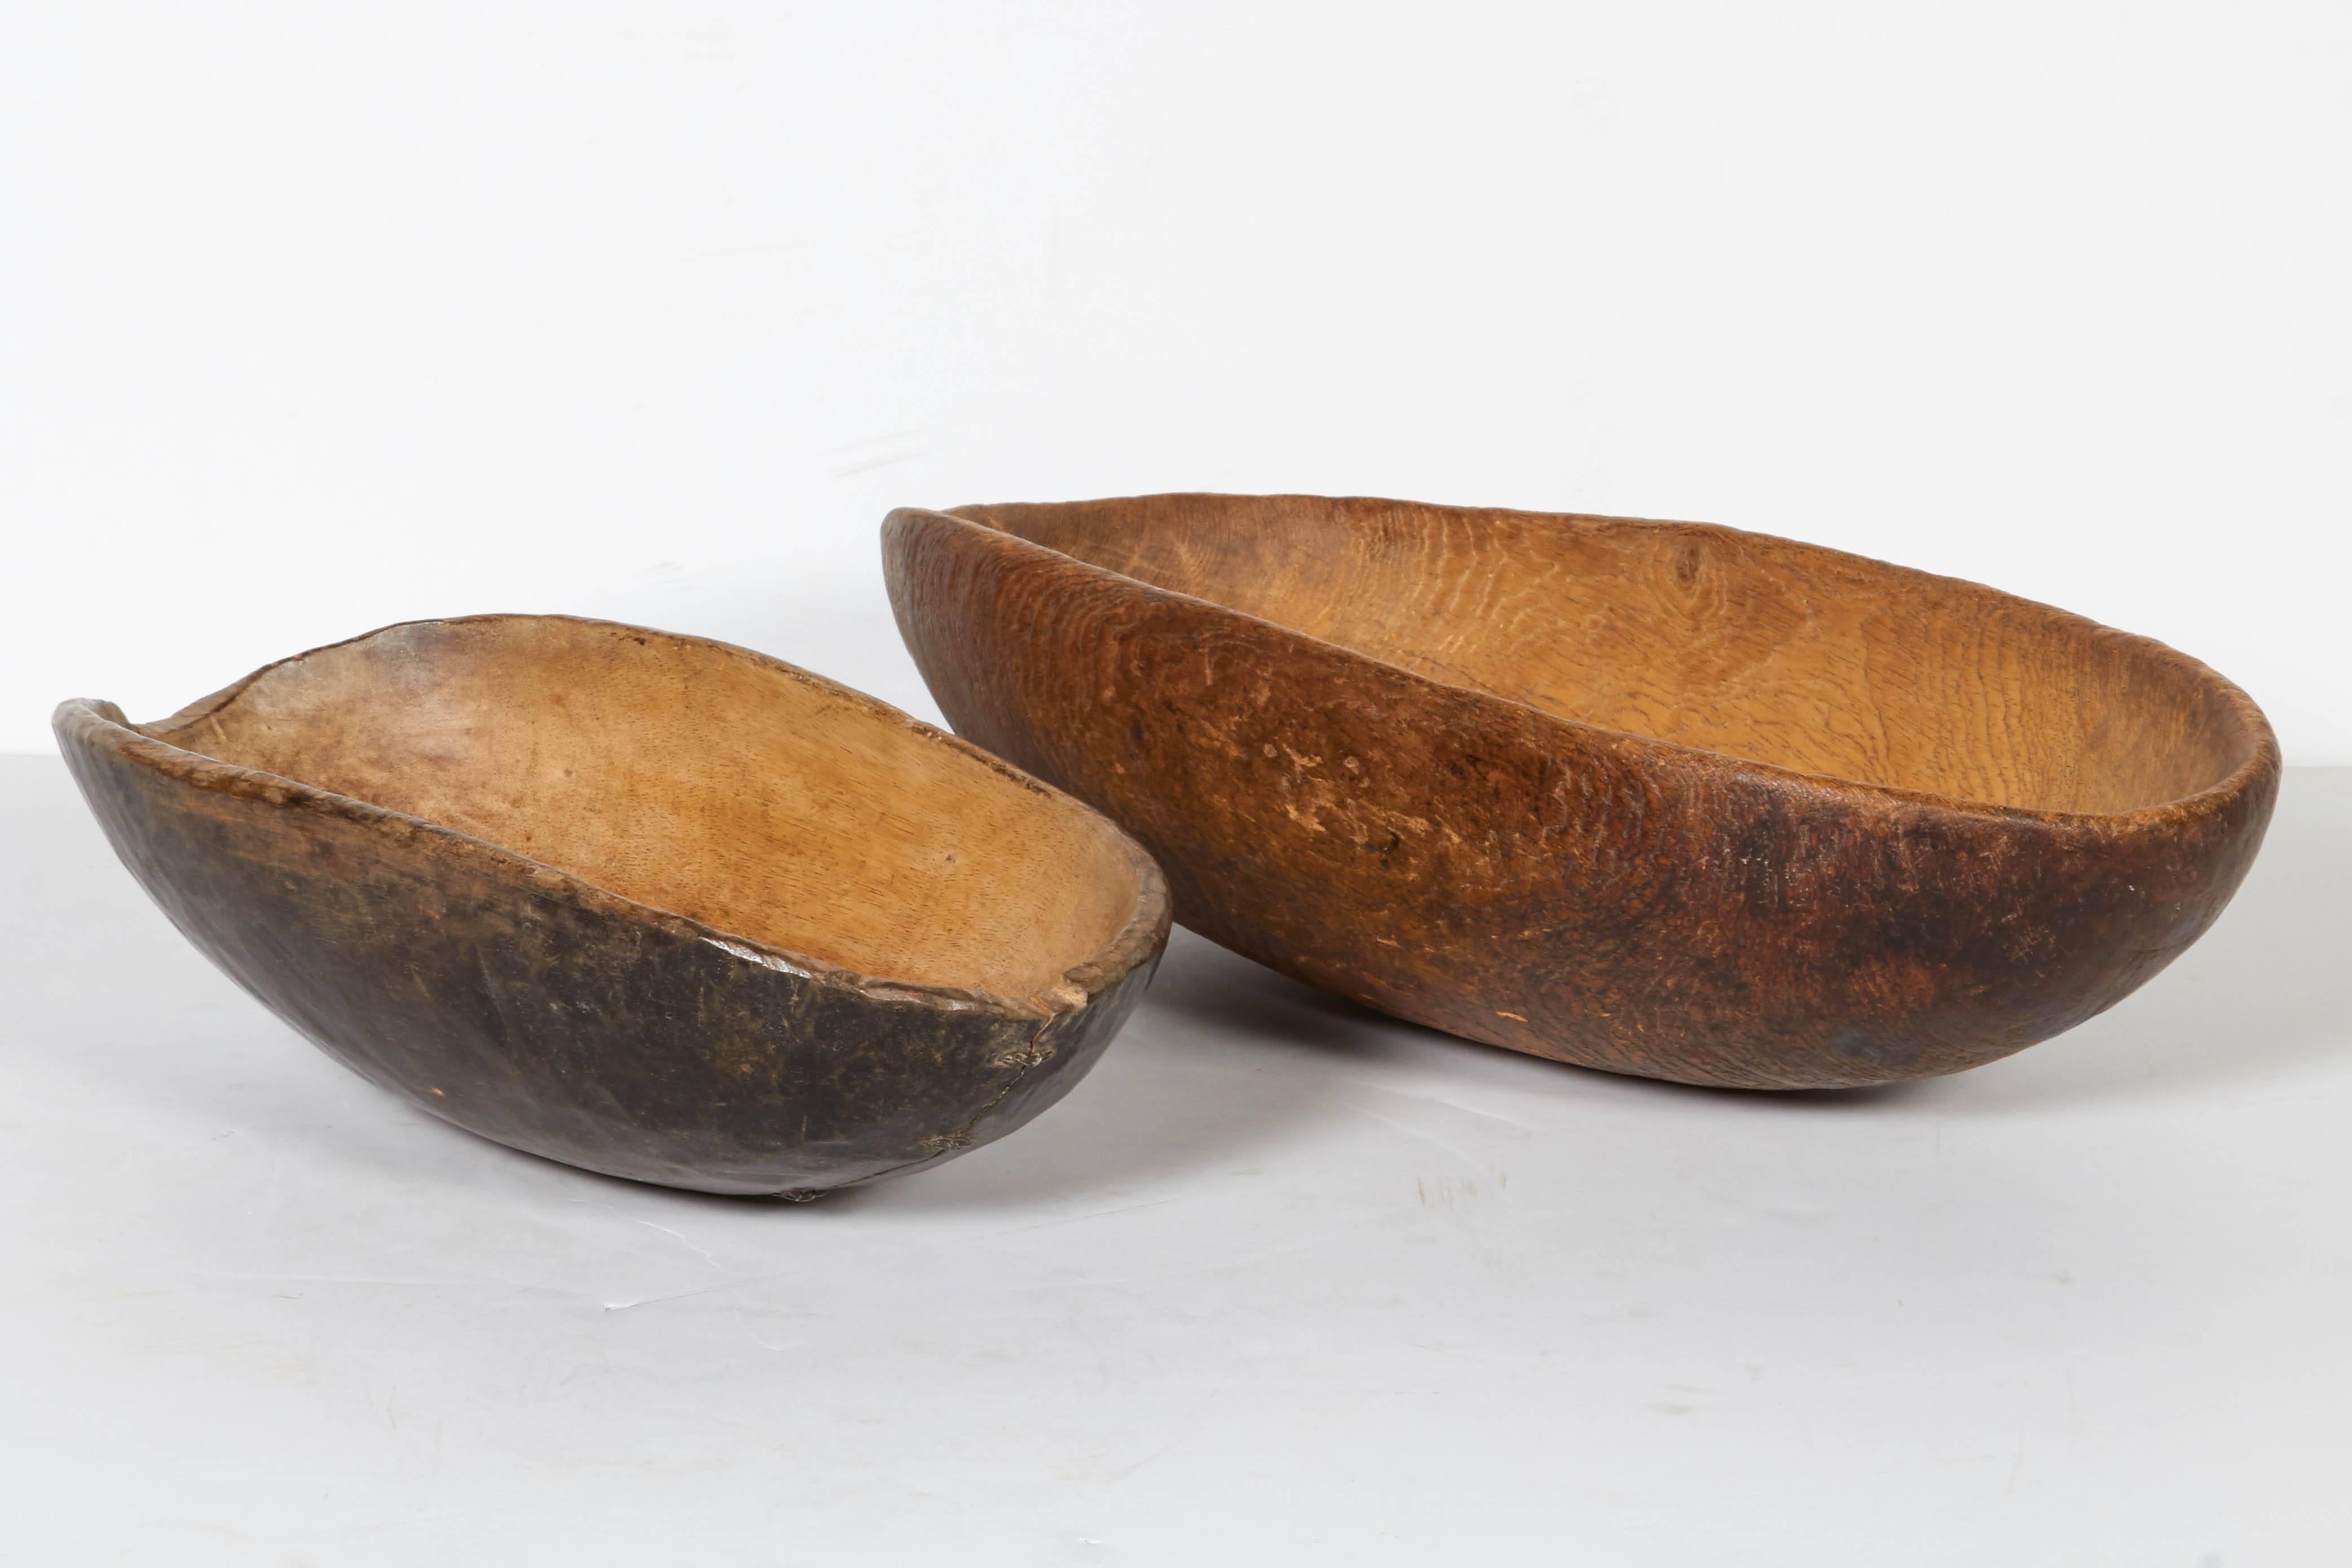 A pair of gracefully shaped West African food bowls, each with a beautiful patina. Sold as a set.
a b h a y a
TR147.